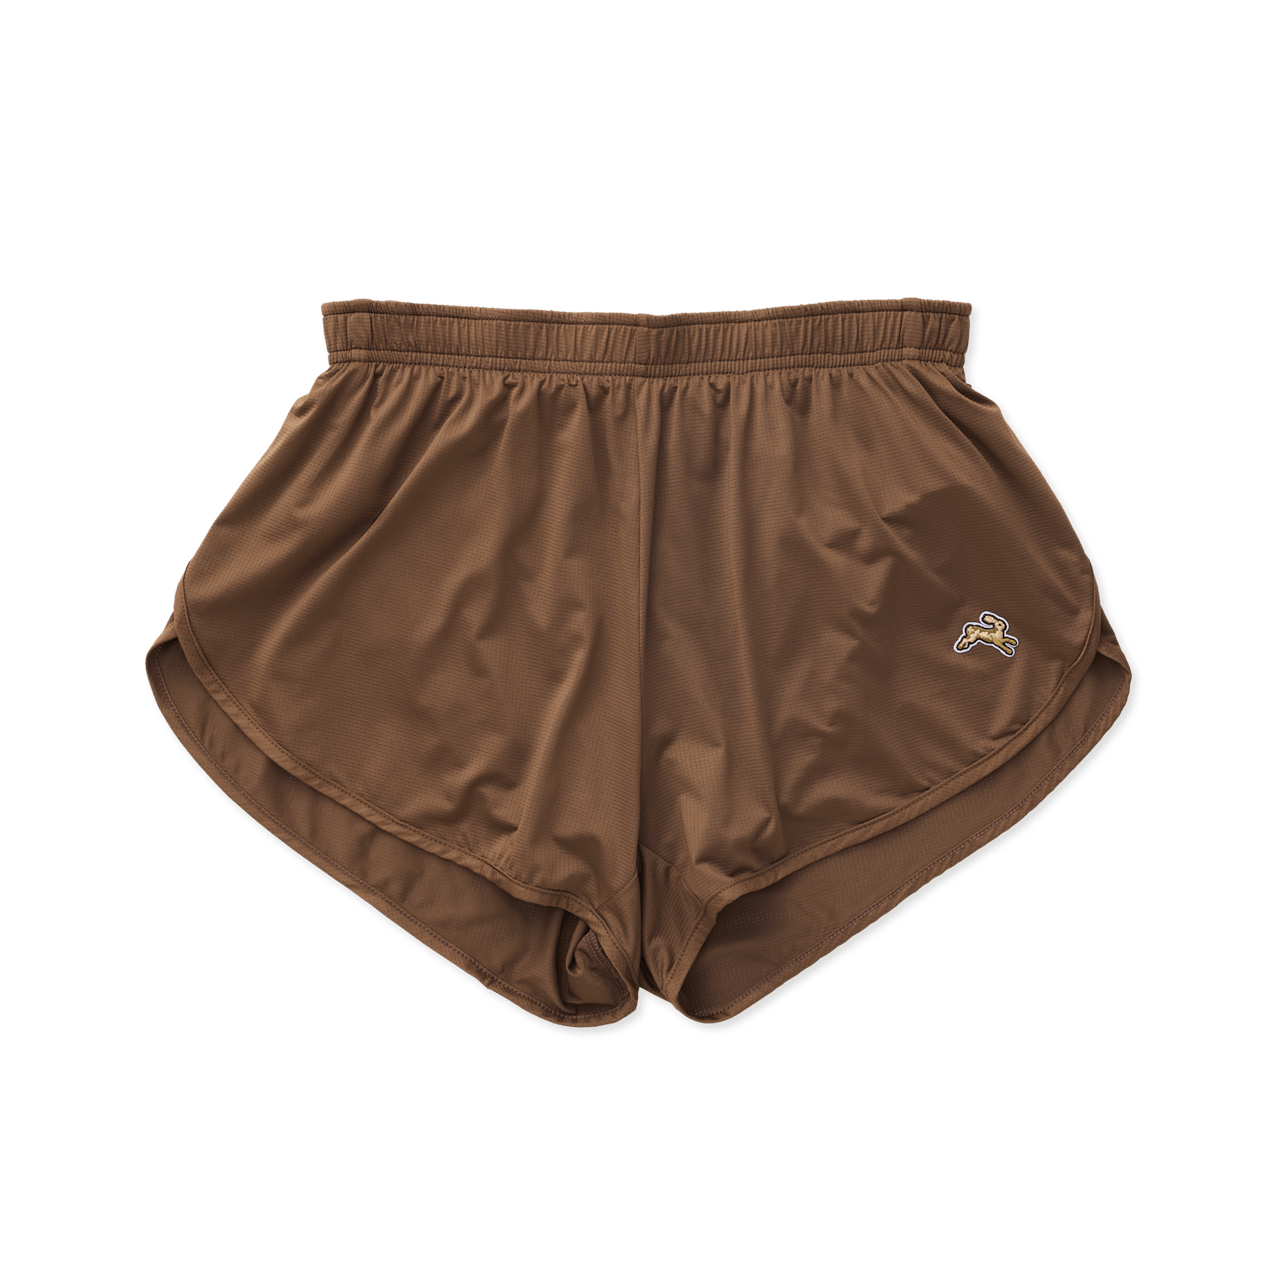 23 Best Sweat Shorts for Men in 2023: Actually Stylish Shorts From